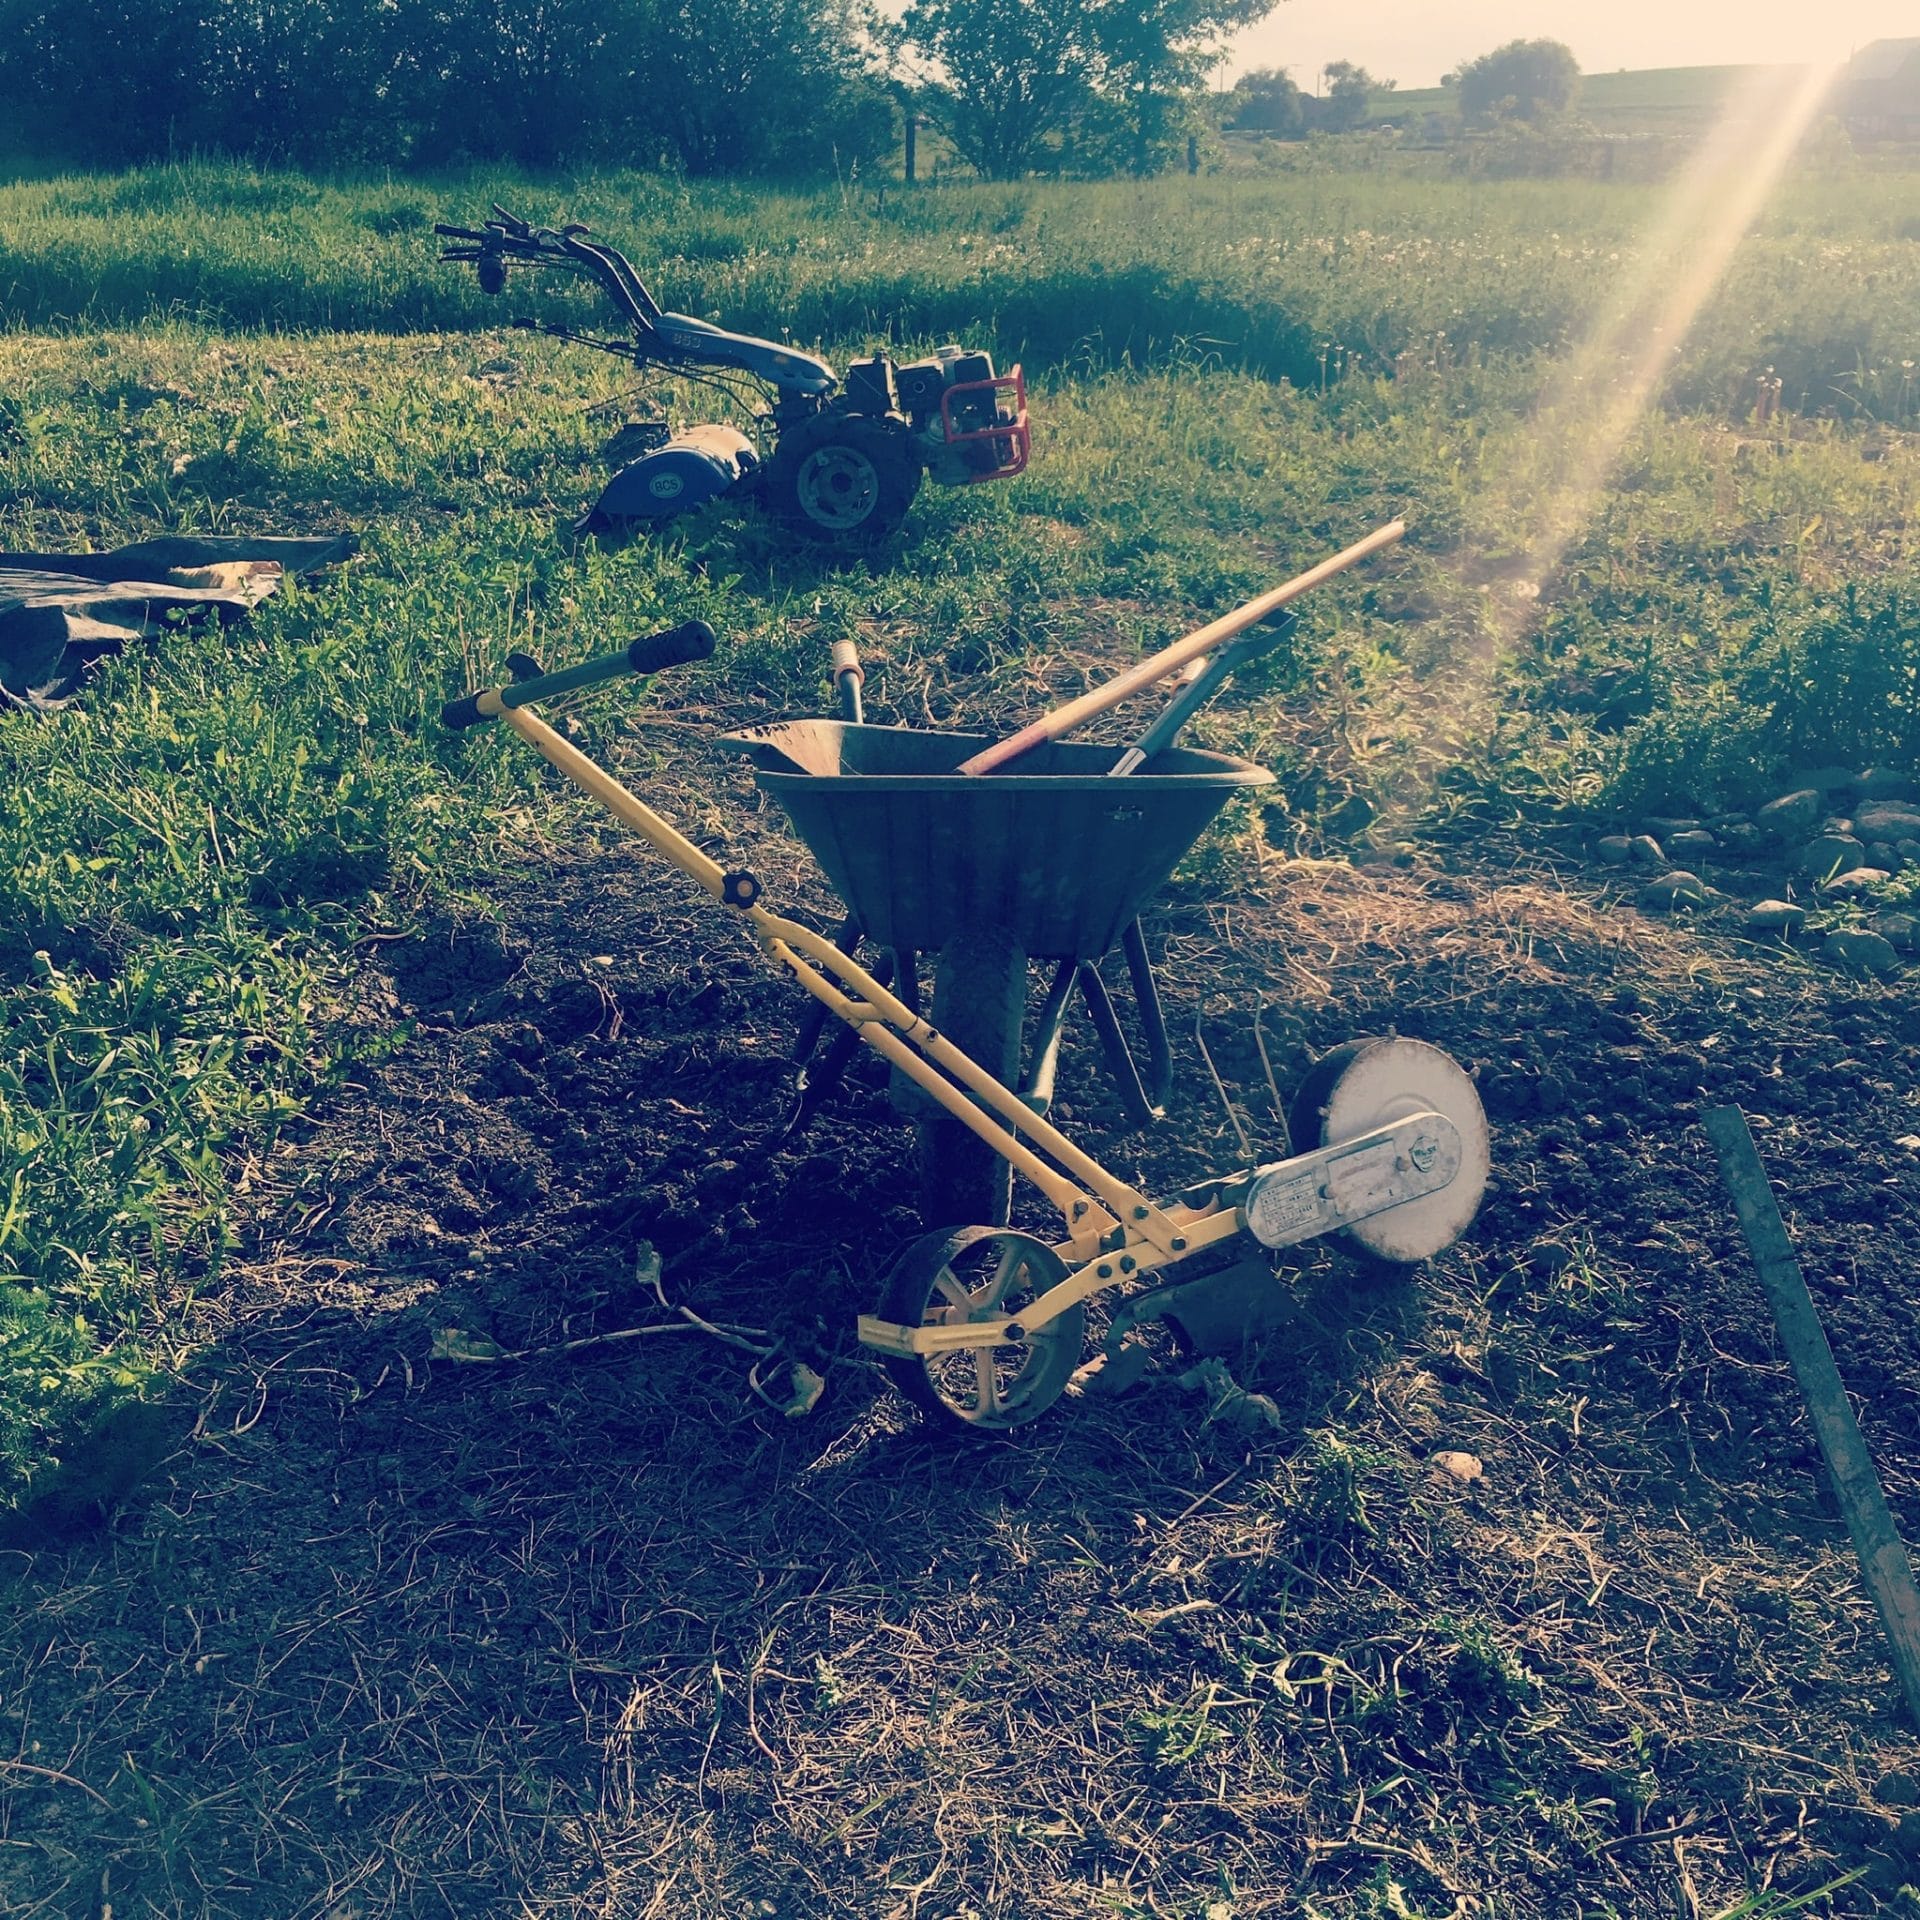 Farming implements after a long days' work on an organic vegetable farm